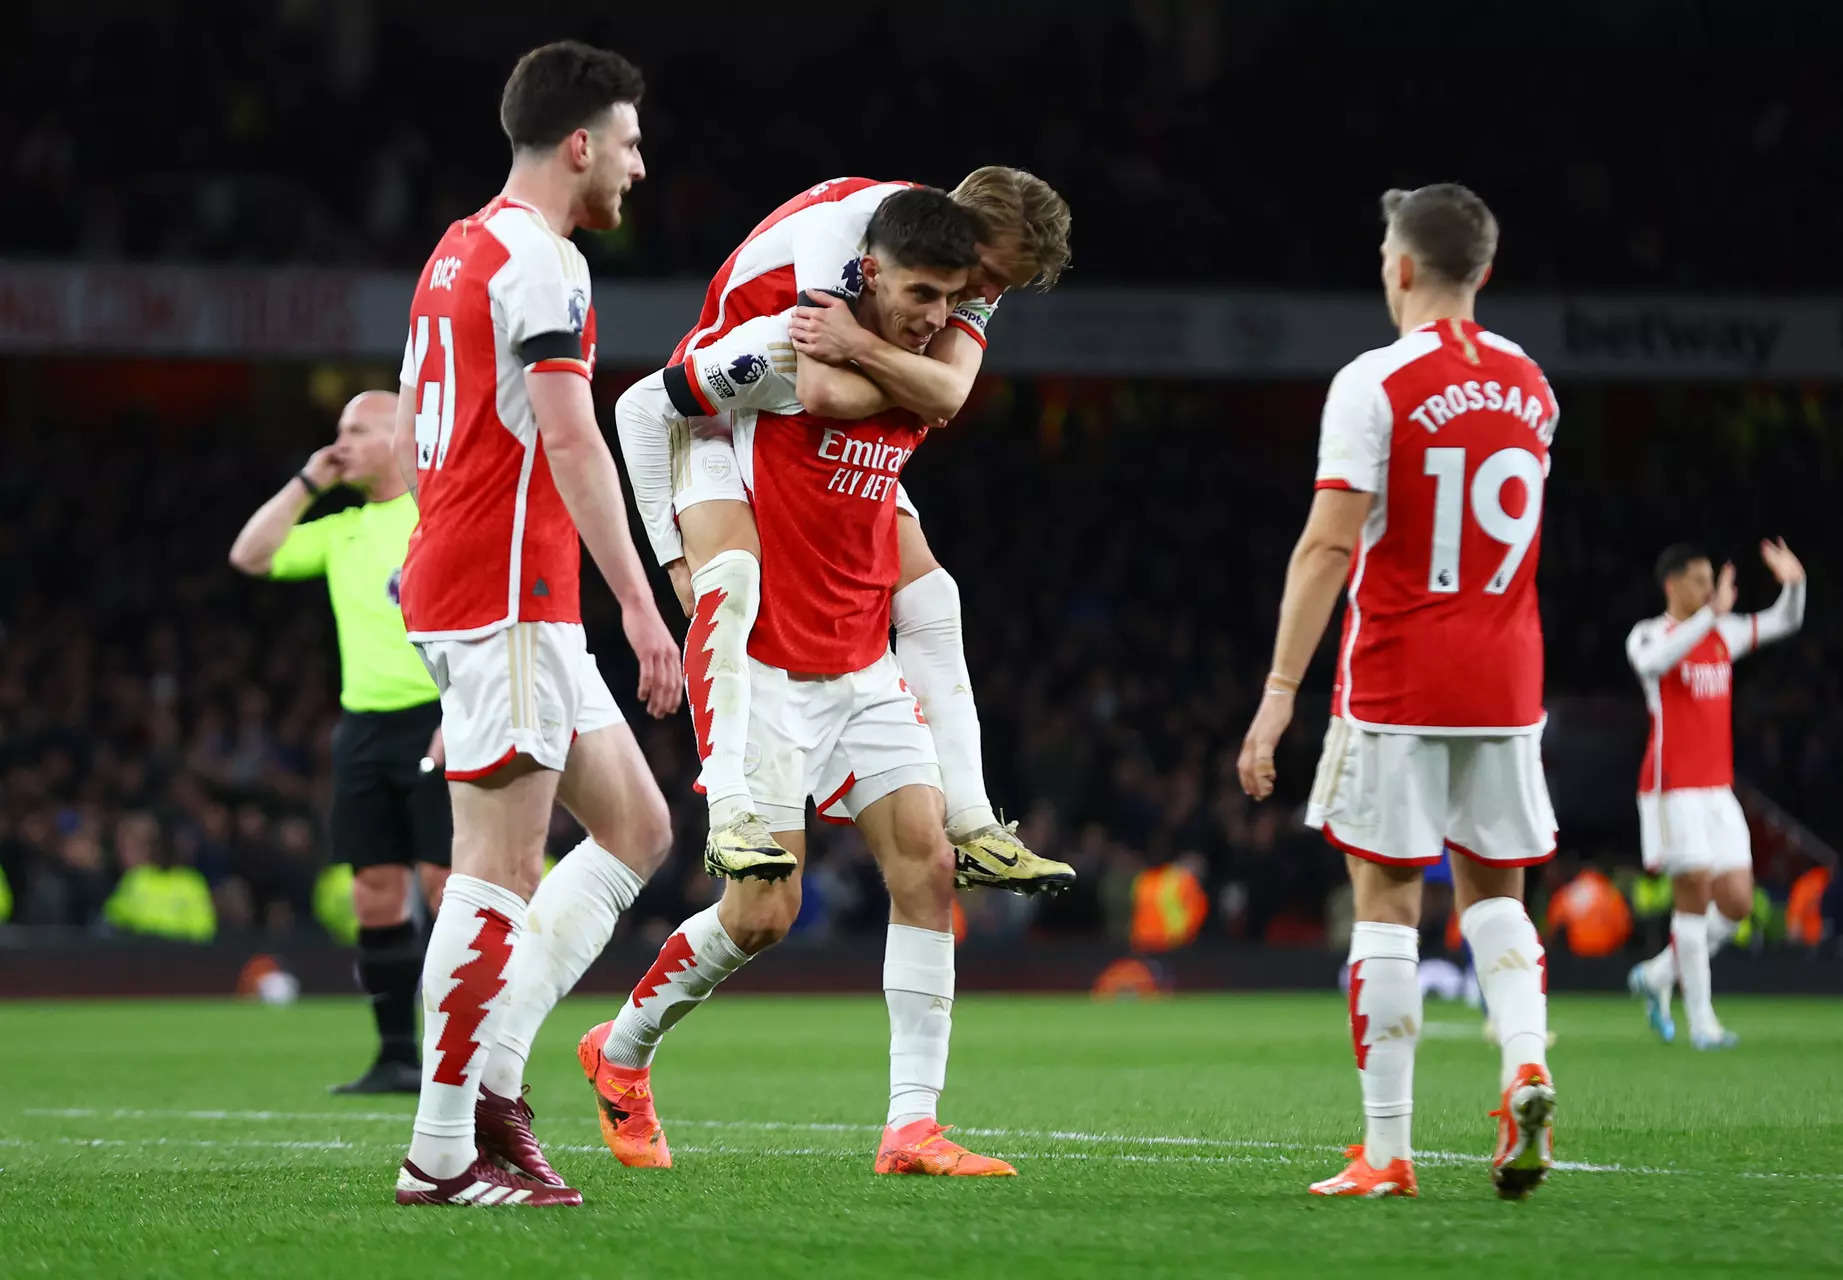 Arsenal thrash Chelsea 5-0 to secure top spot in EPL standings